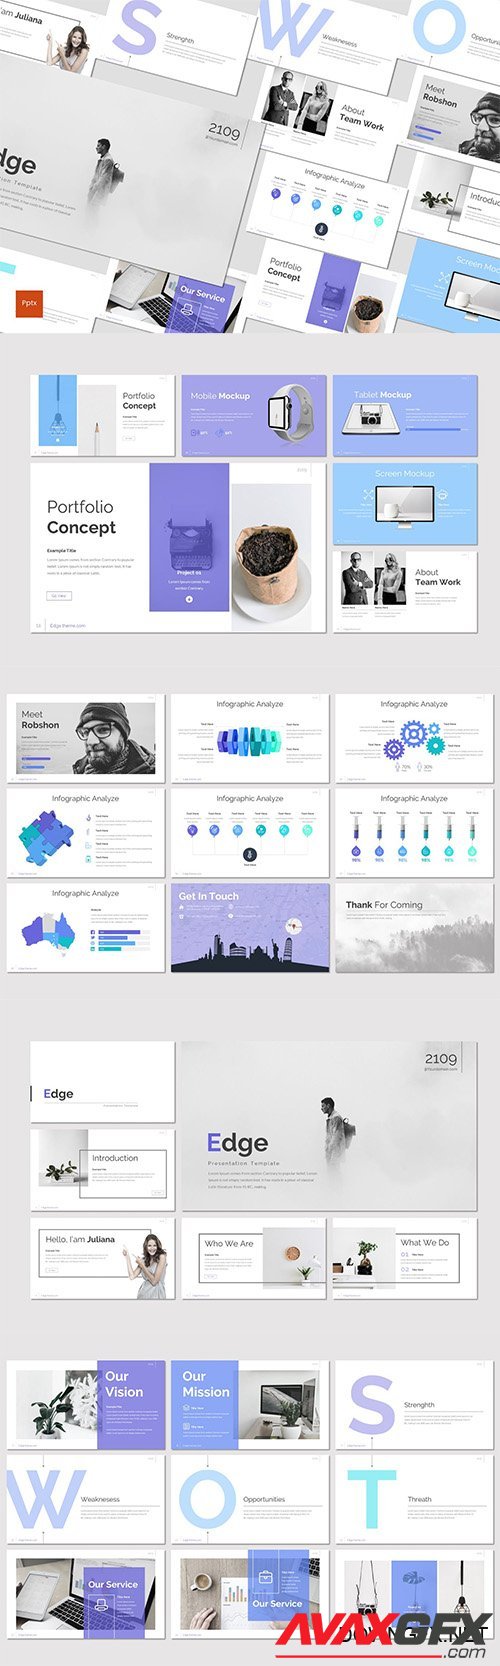 Edge - Powerpoint, Keynote and Google Slides Templates